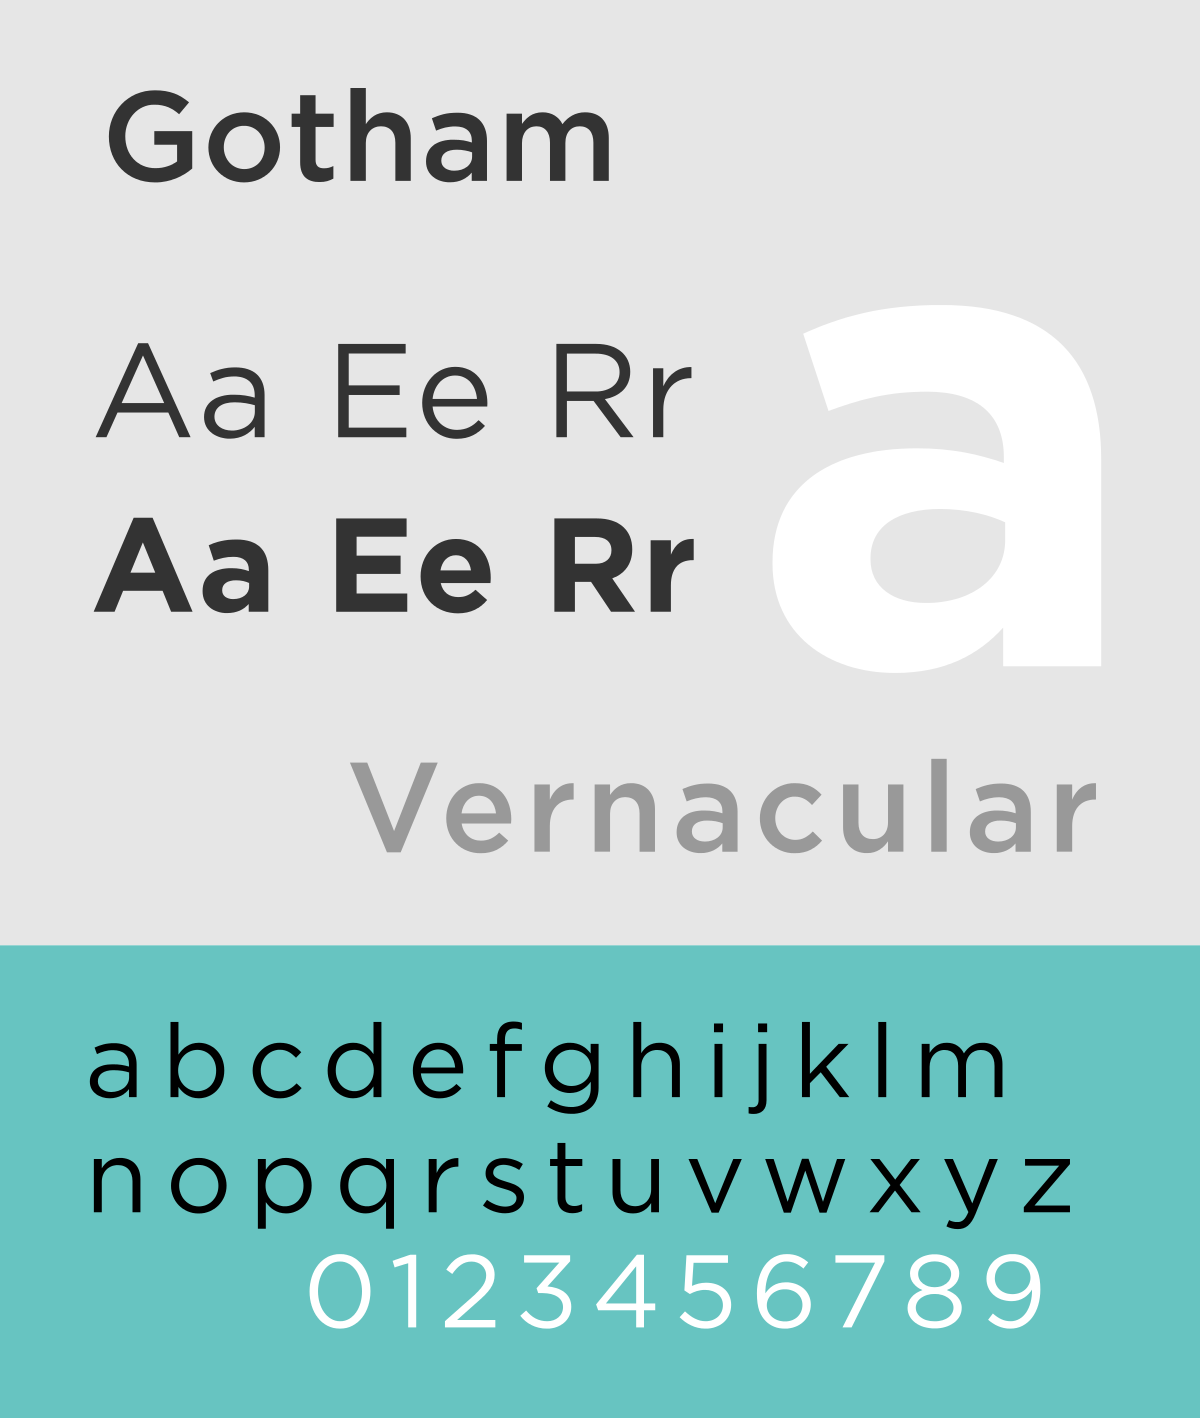 "Gotham" type specimen, referred to as "masculine, new and fresh" by its creator Frere-Jones.